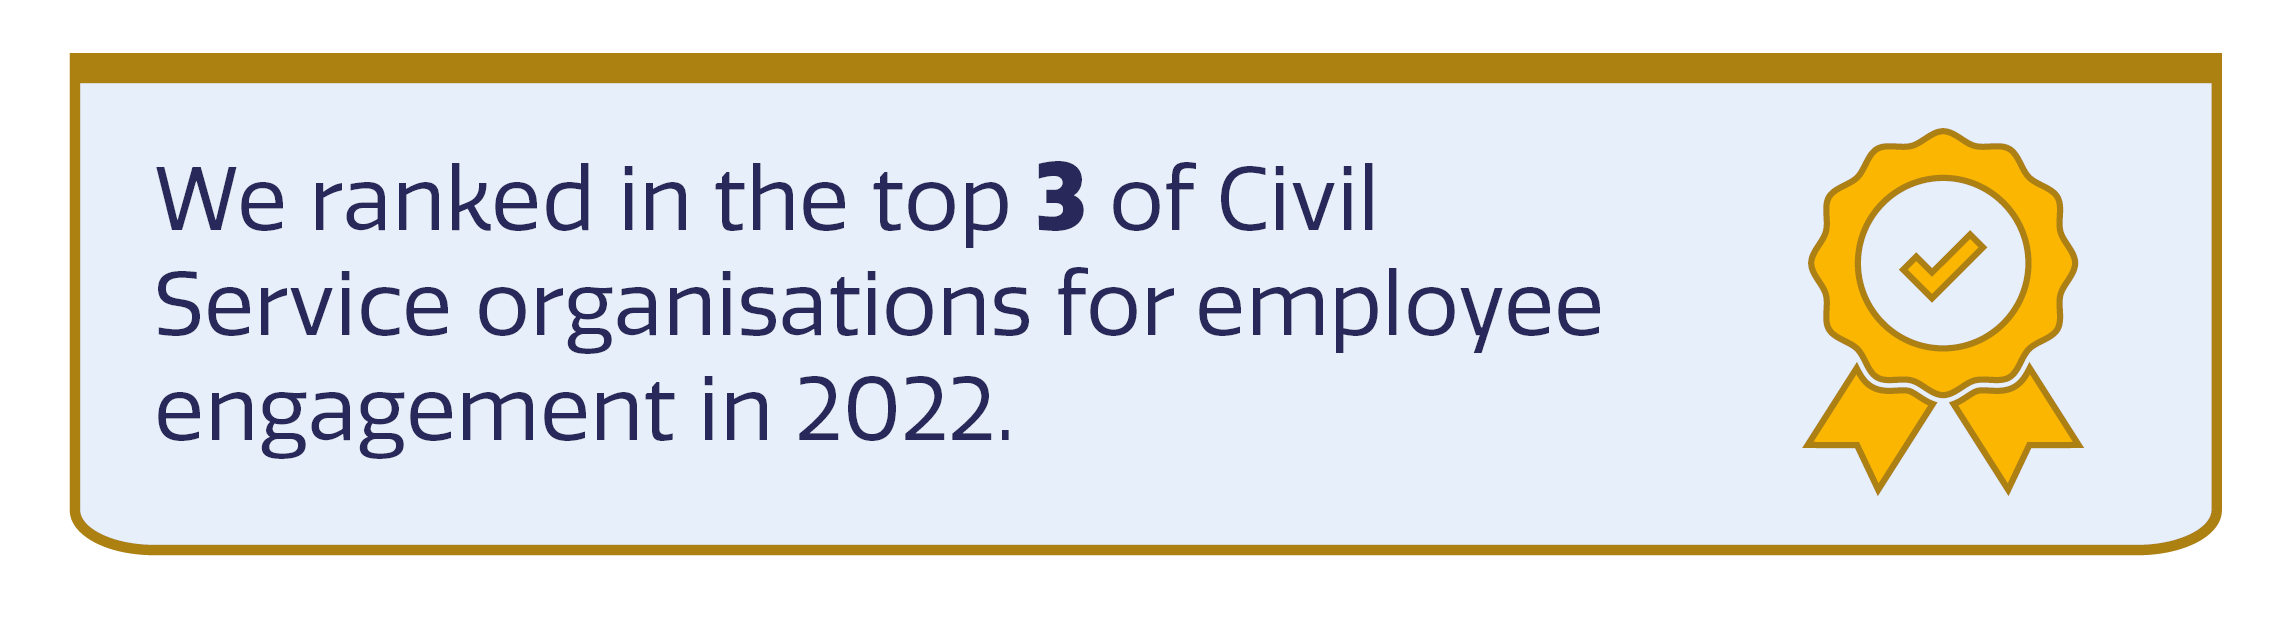 Yellow rosette icon with text: 'We ranked in the top 3 of Civil Service organisations for employee engagement in 2022.'